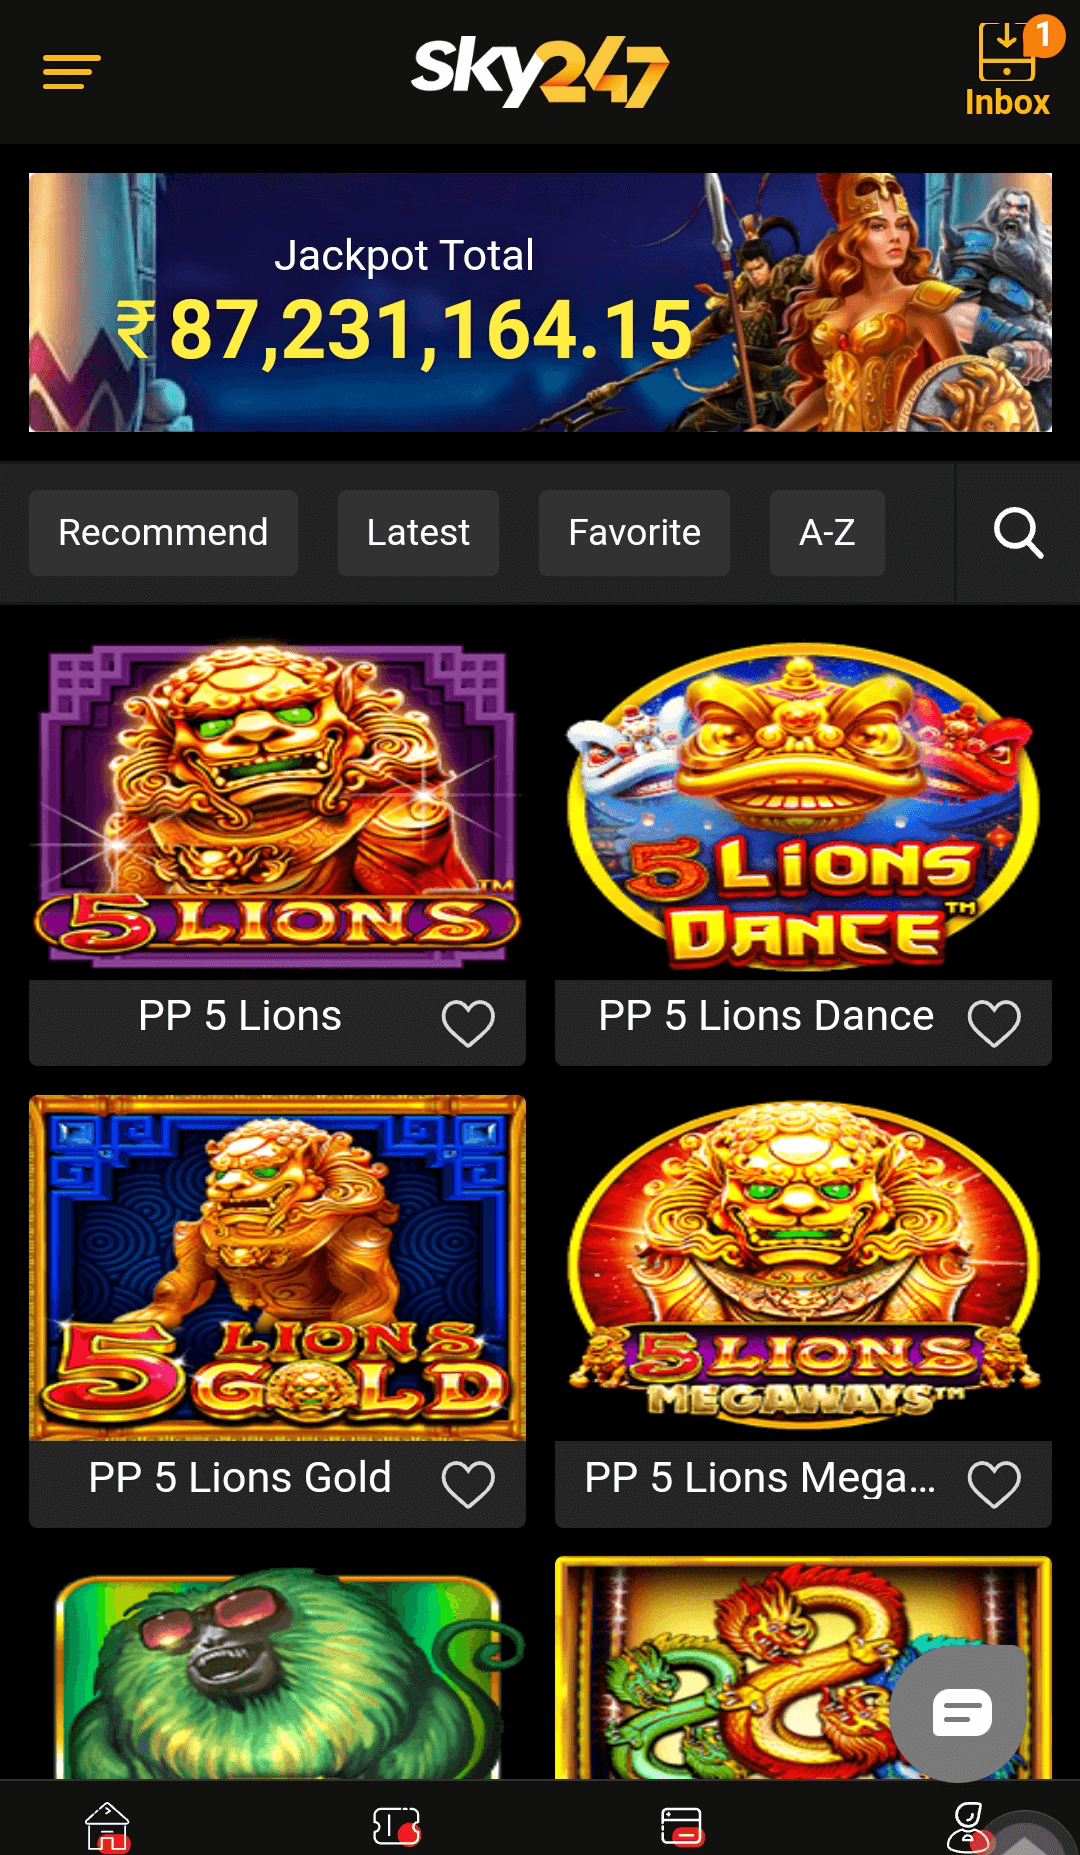 Slots section in the Sky247 app